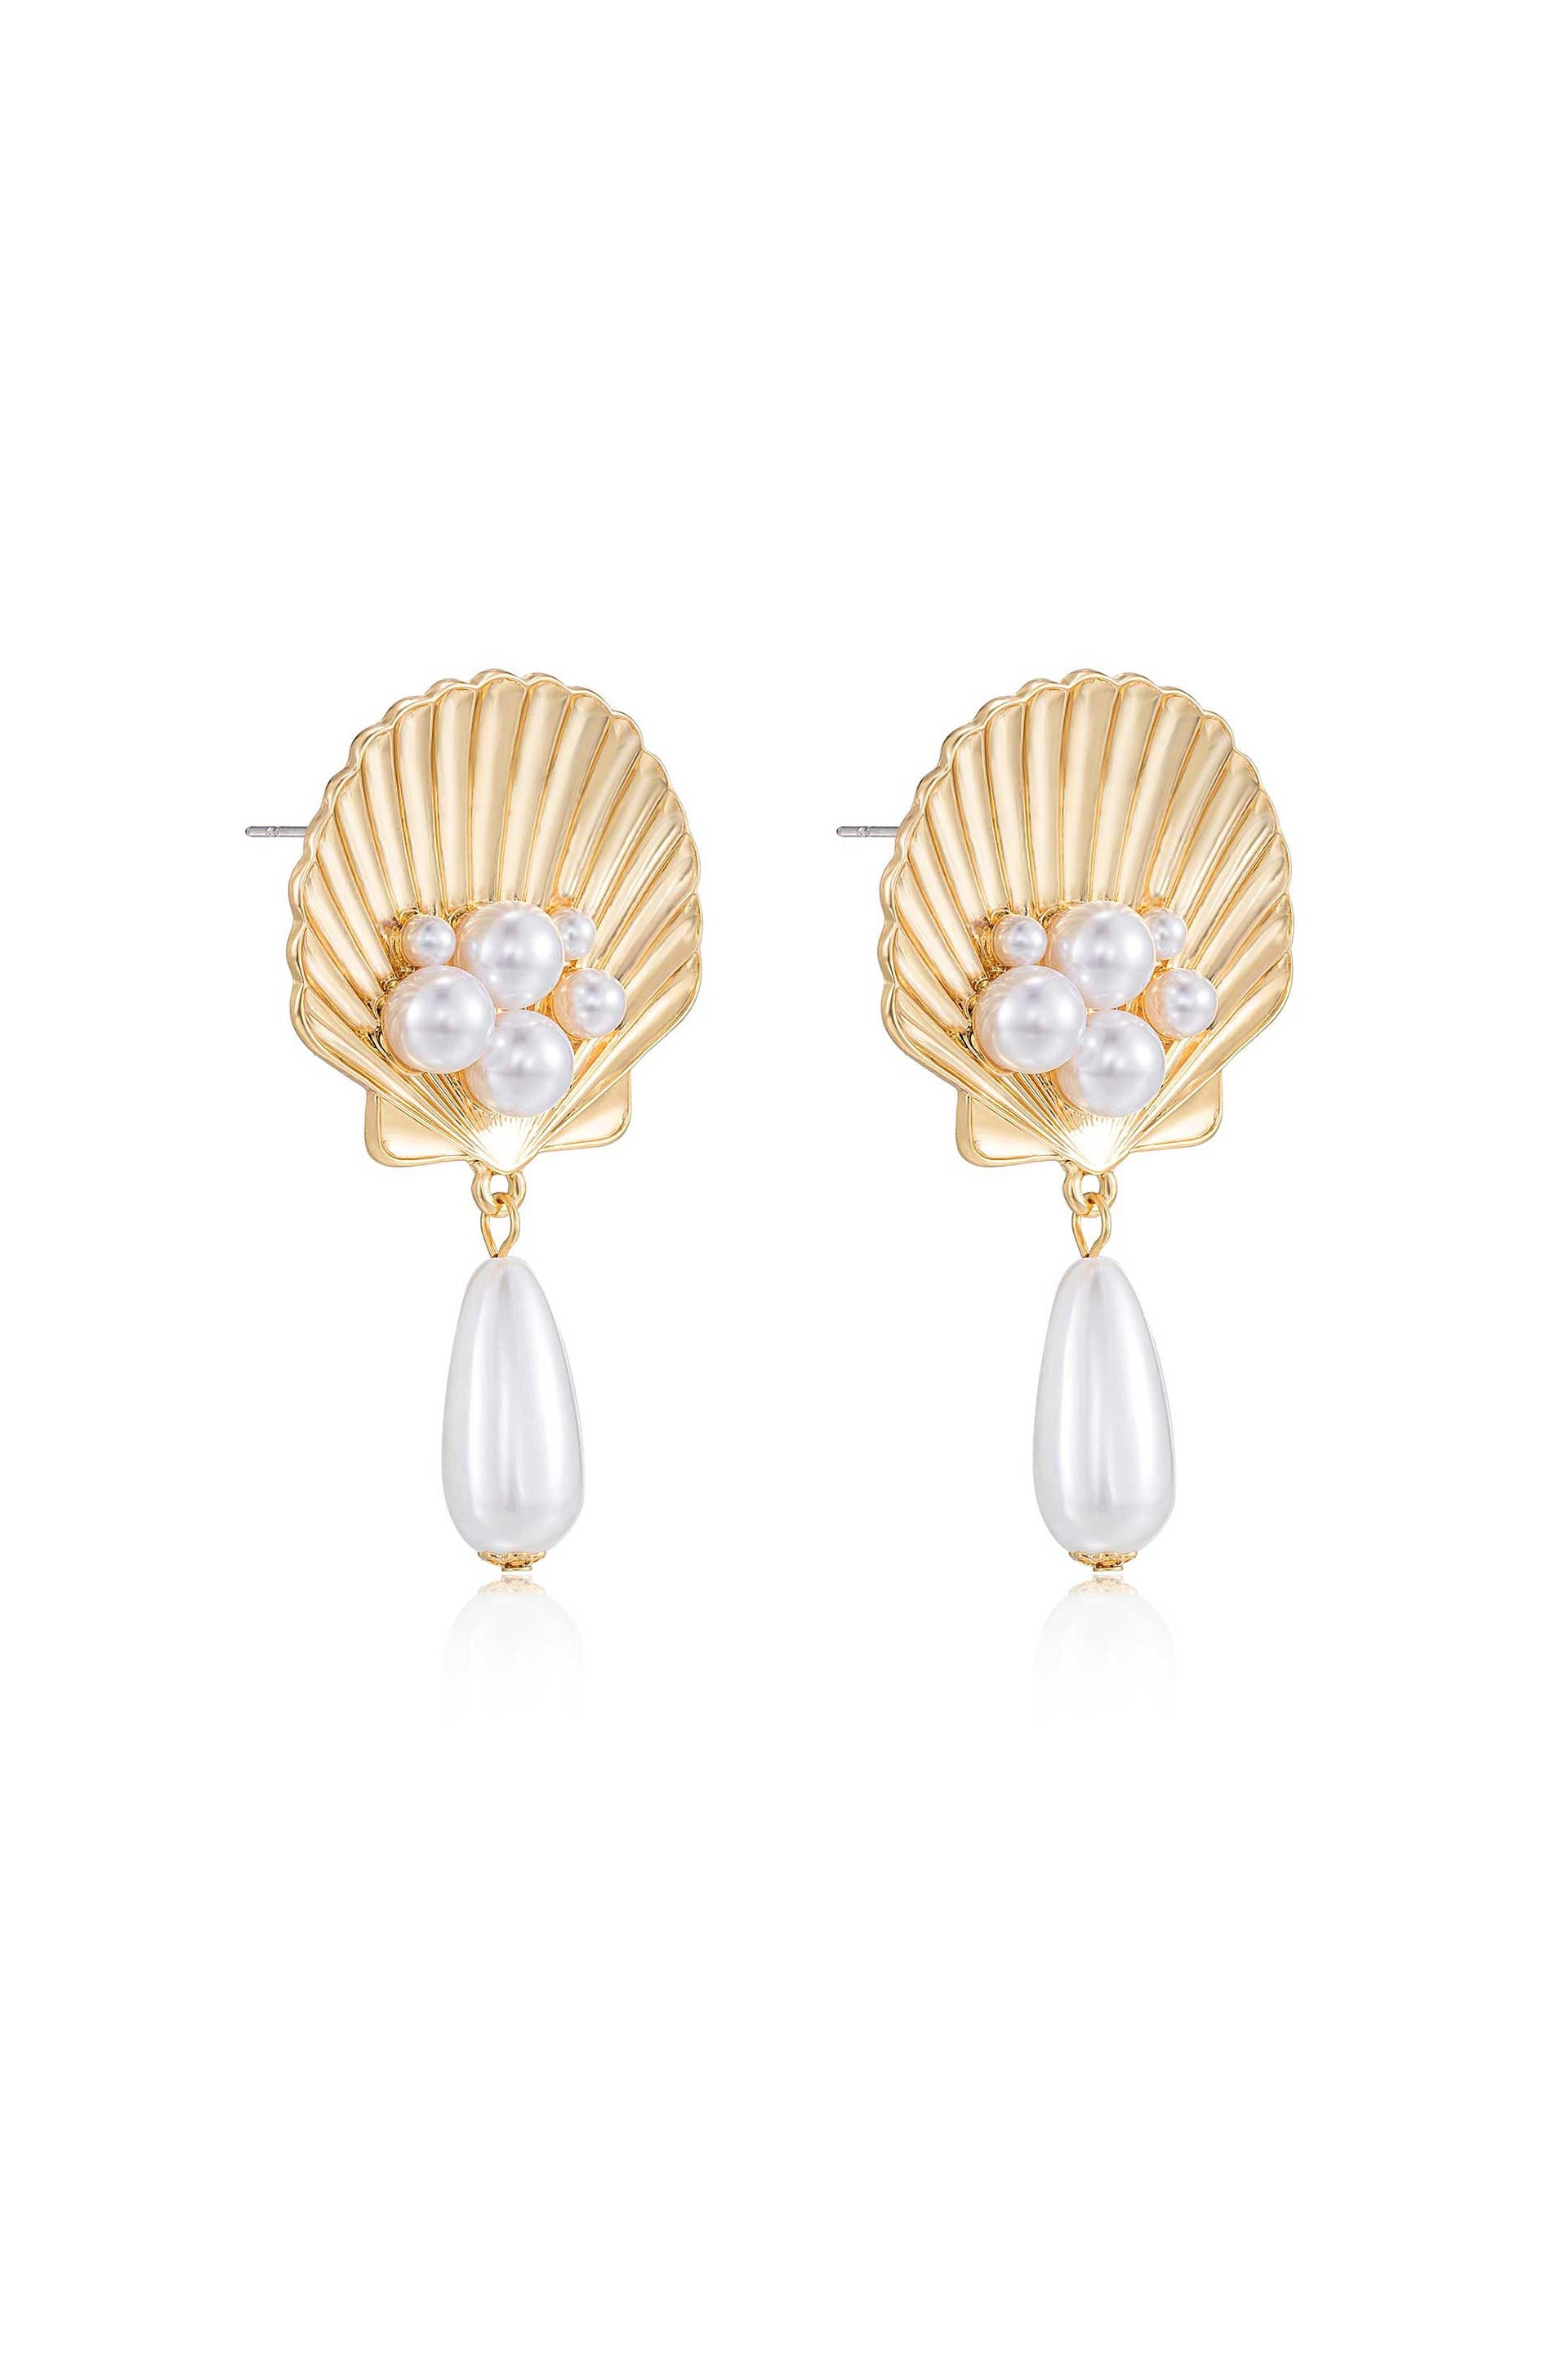 All the Pearl Accessories for Summer Please! - M Loves M